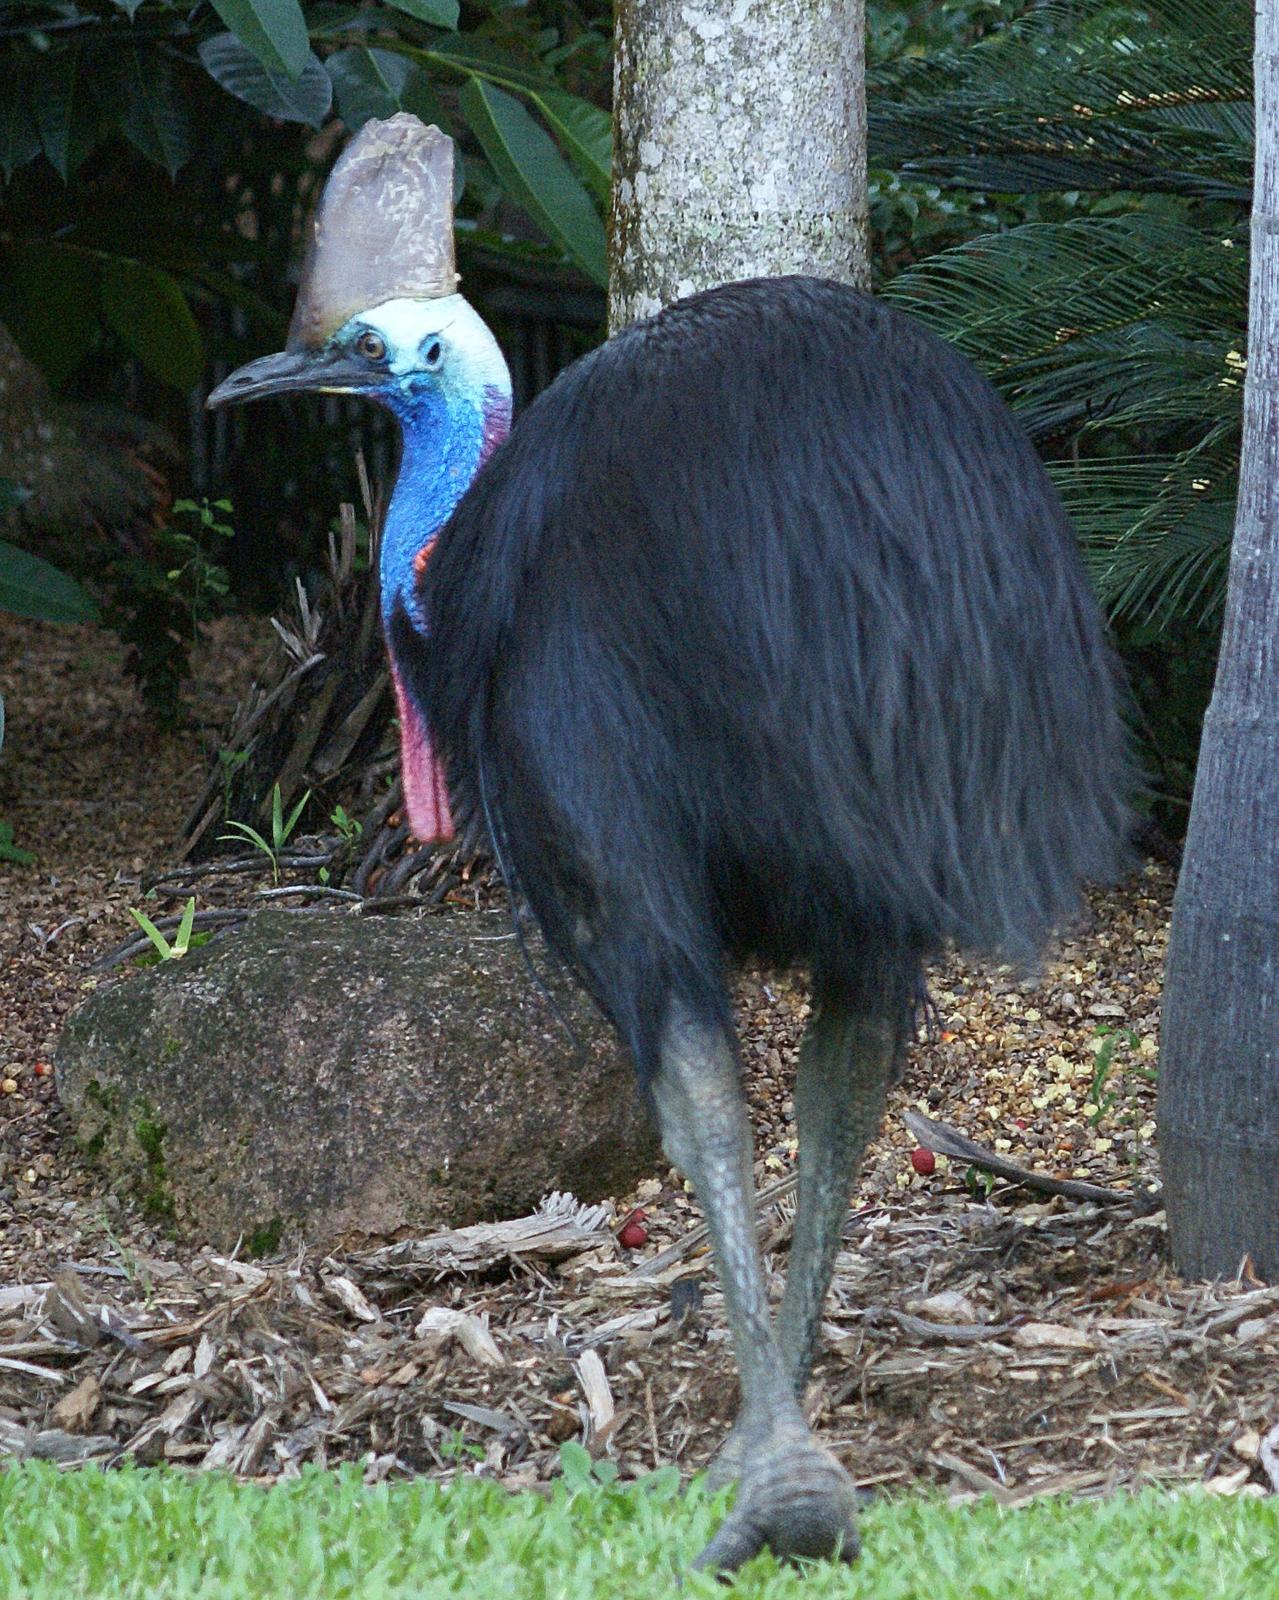 Southern Cassowary Photo by Steve Percival